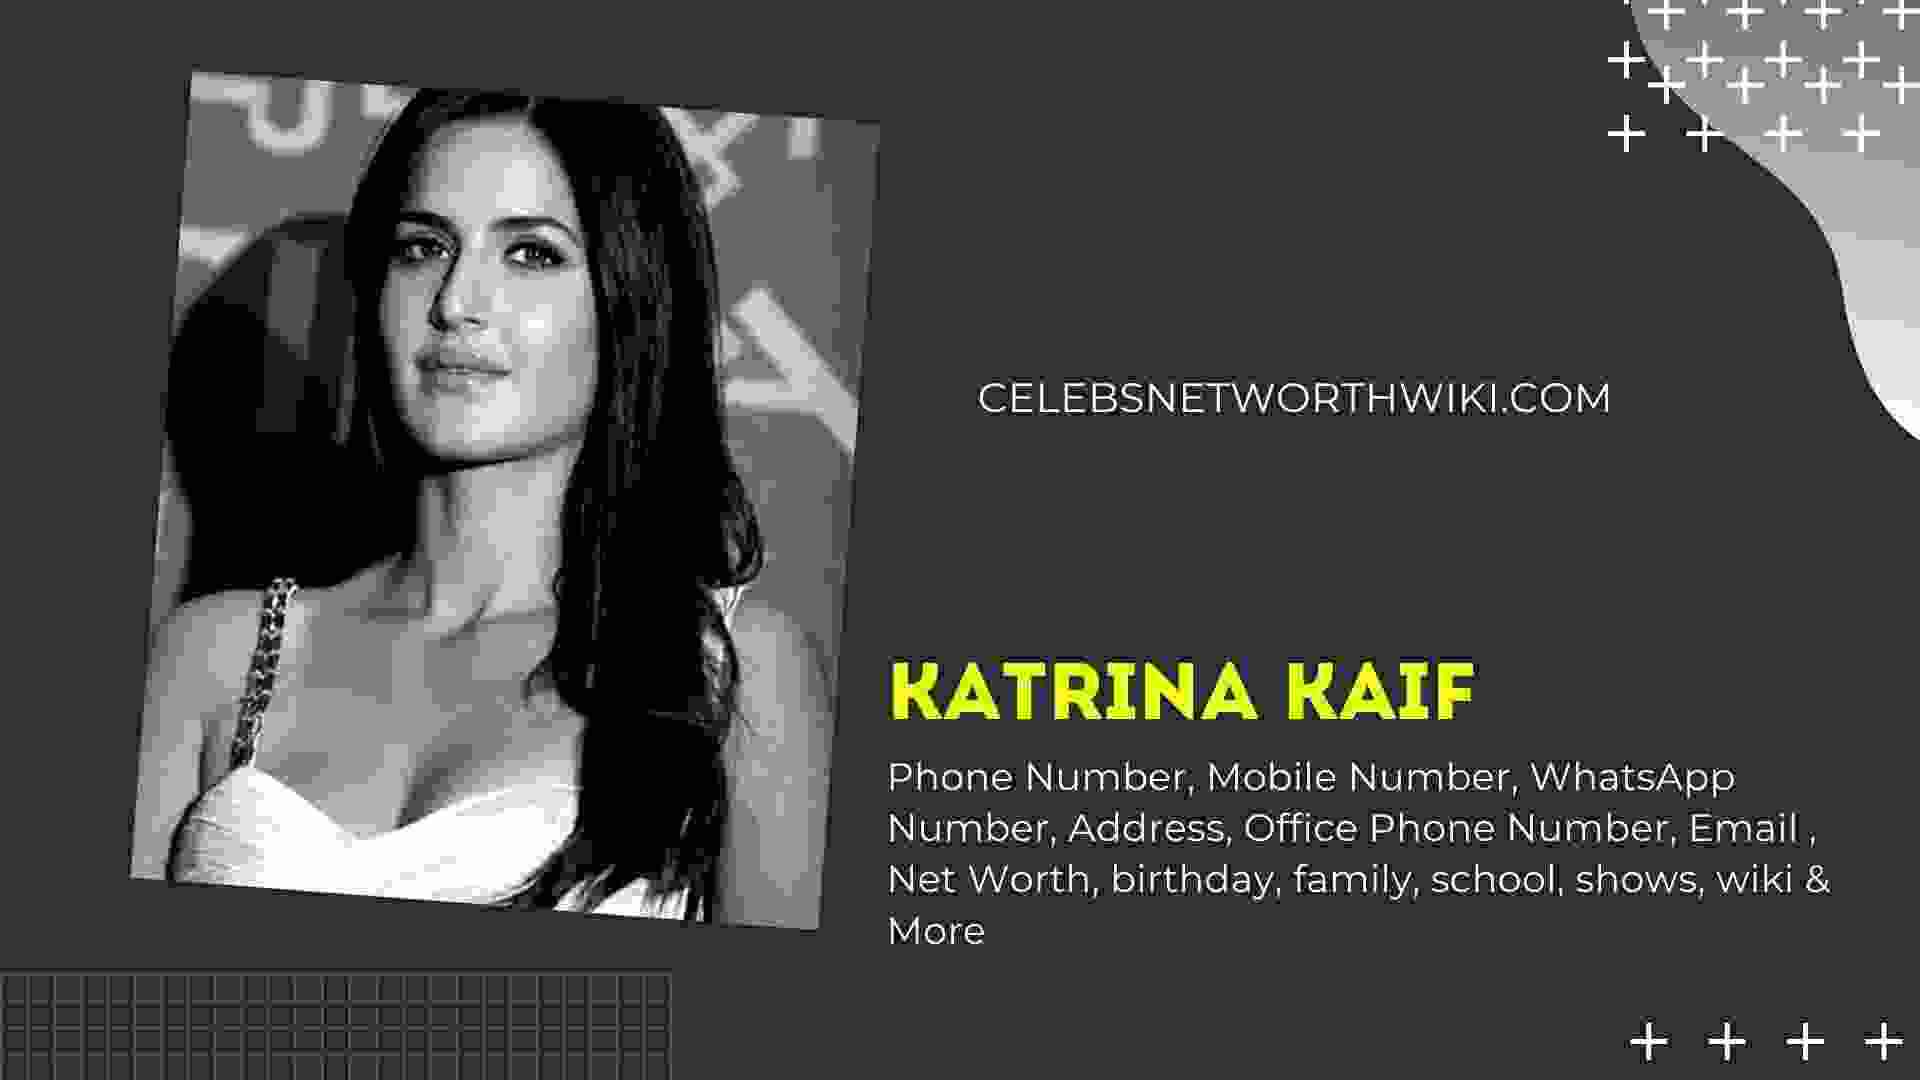 Katrina Kaif Phone Number Whatsapp Number Contact Number Office Phone Number Celebs Networth Wiki The site where you want to register blocks public numbers. katrina kaif phone number whatsapp